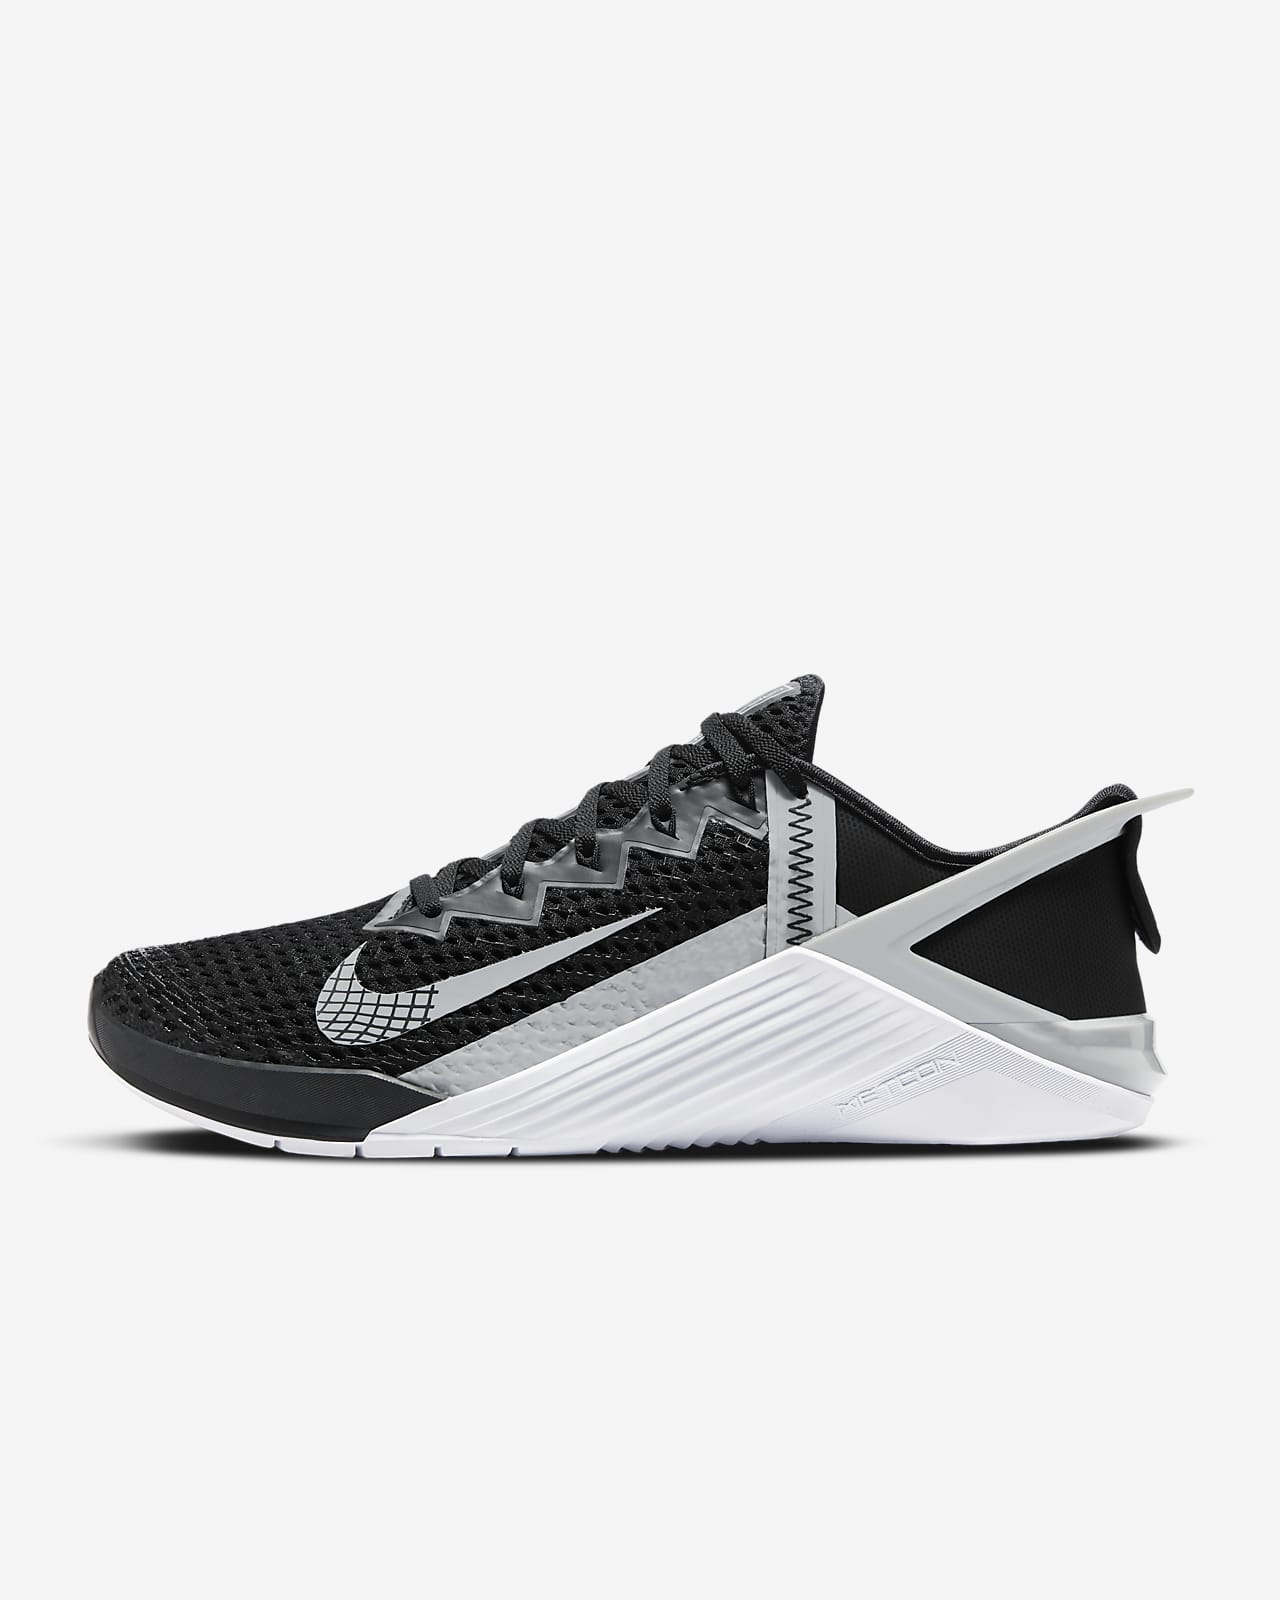 mens metcon trainers